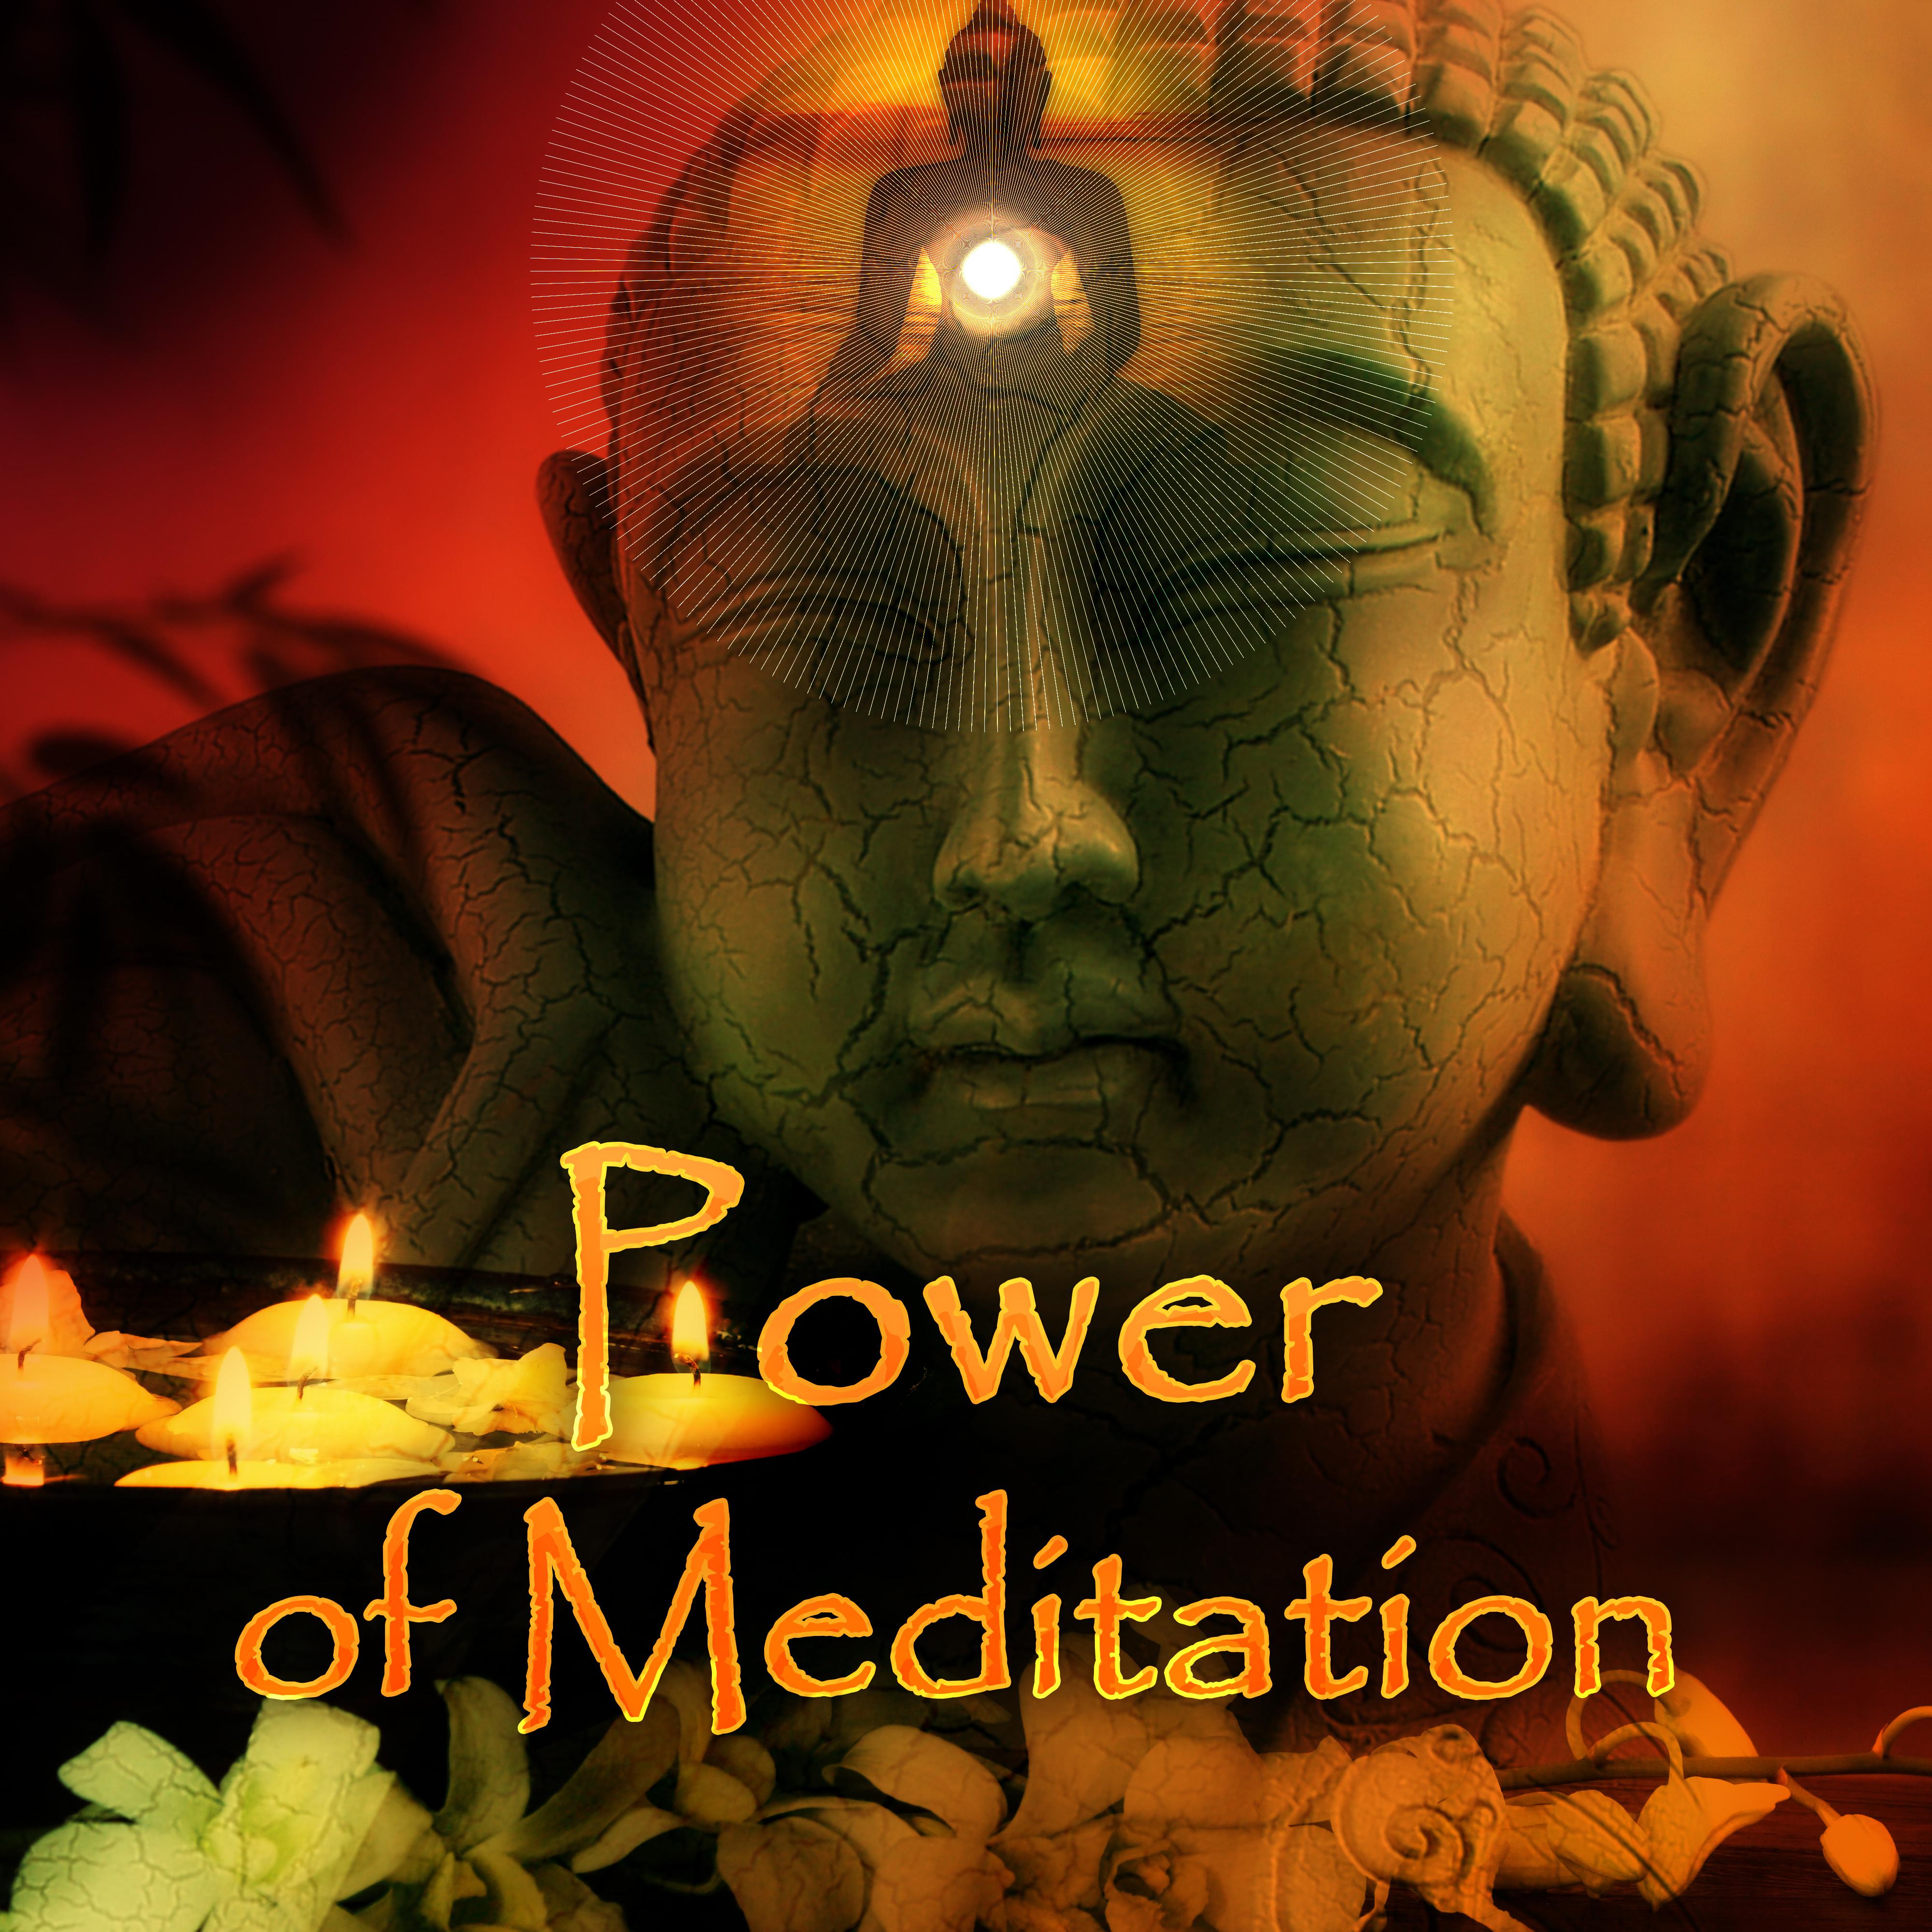 Power of Meditation  New Age Tracks to Meditate, Yoga Classes, Spiritual Retreat, Awareness, Mindfulness, Stress Release, Wellbeing, Naturescapes